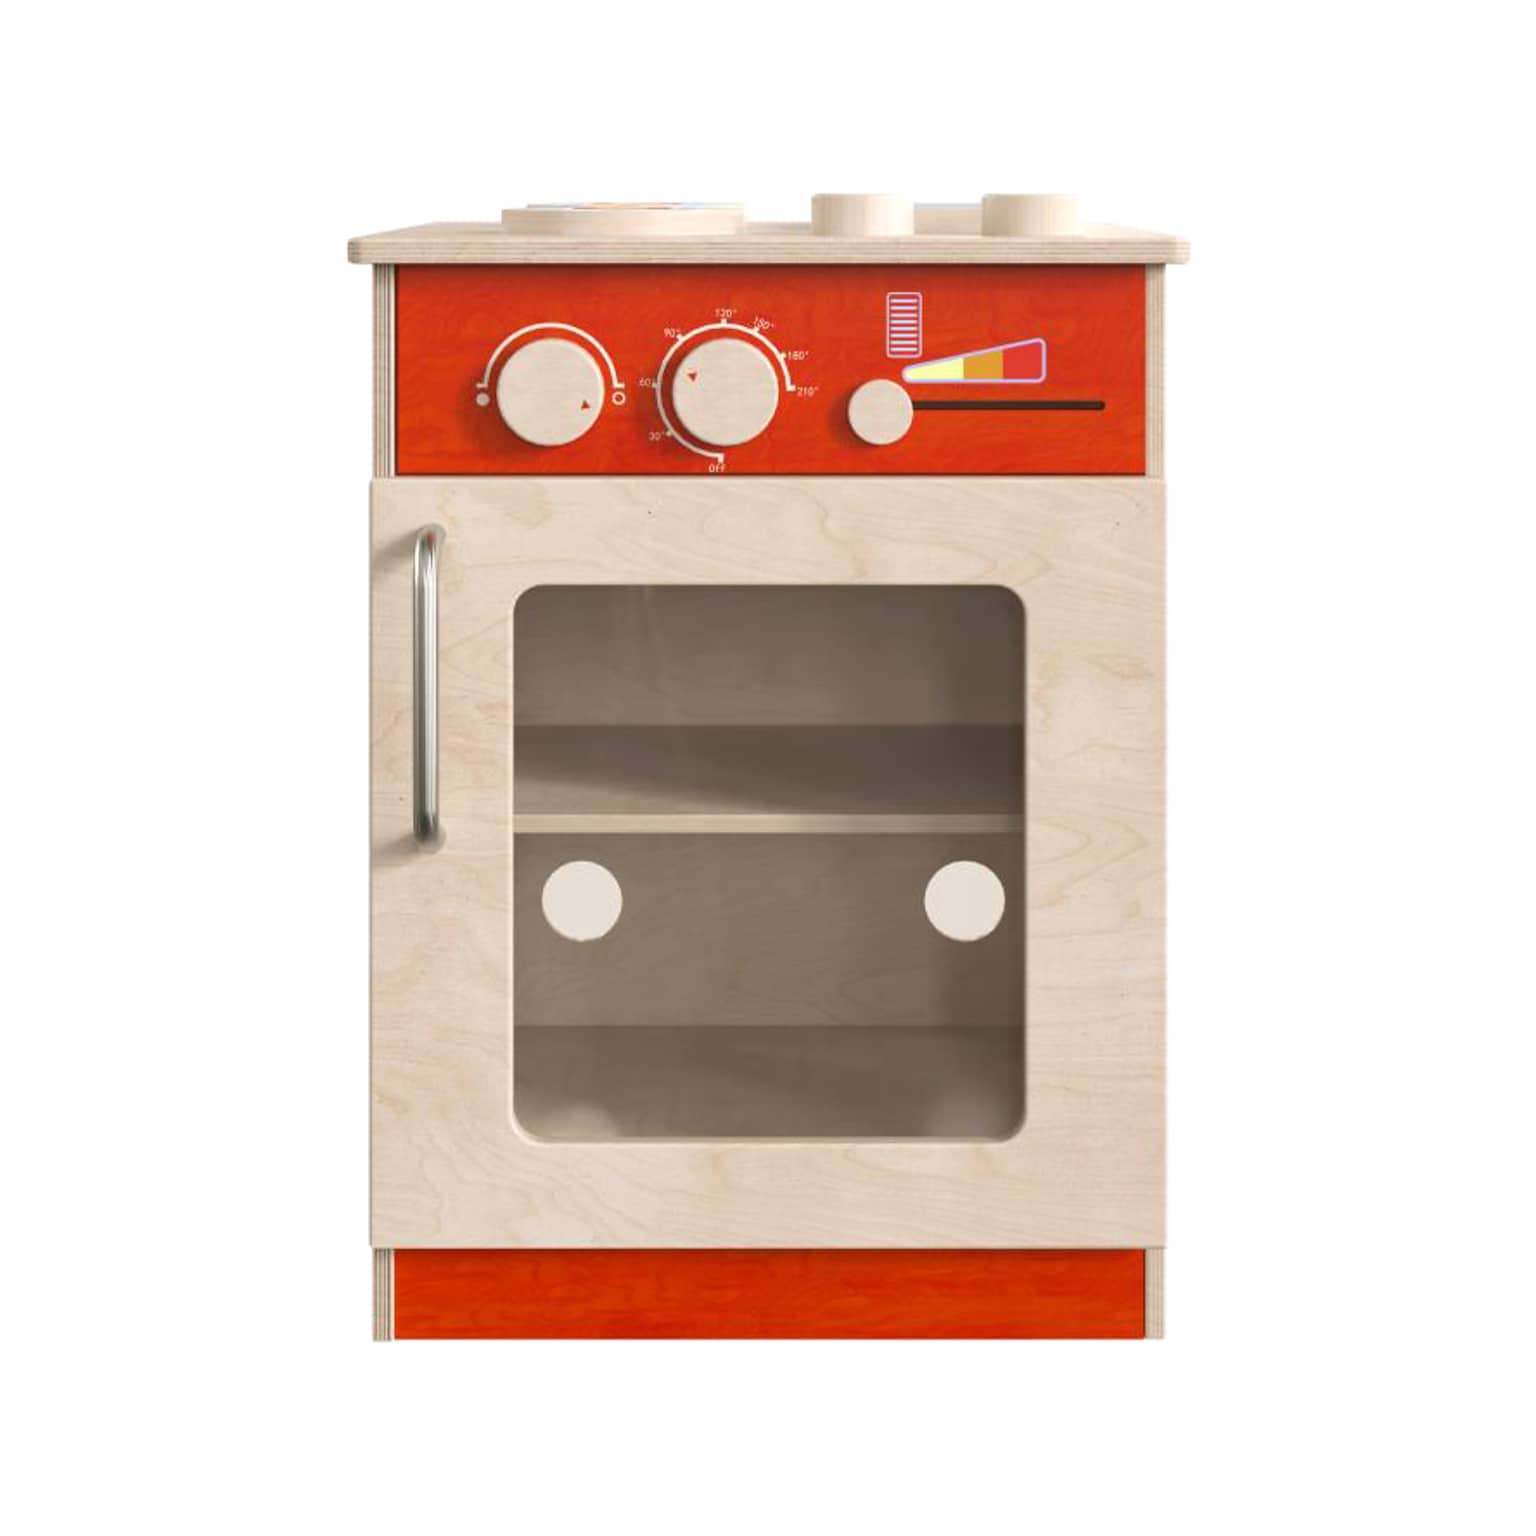 Flash Furniture Bright Beginnings Childrens Kitchen Stove with Integrated Storage, Brown/Red (MK-ME03522-GG)